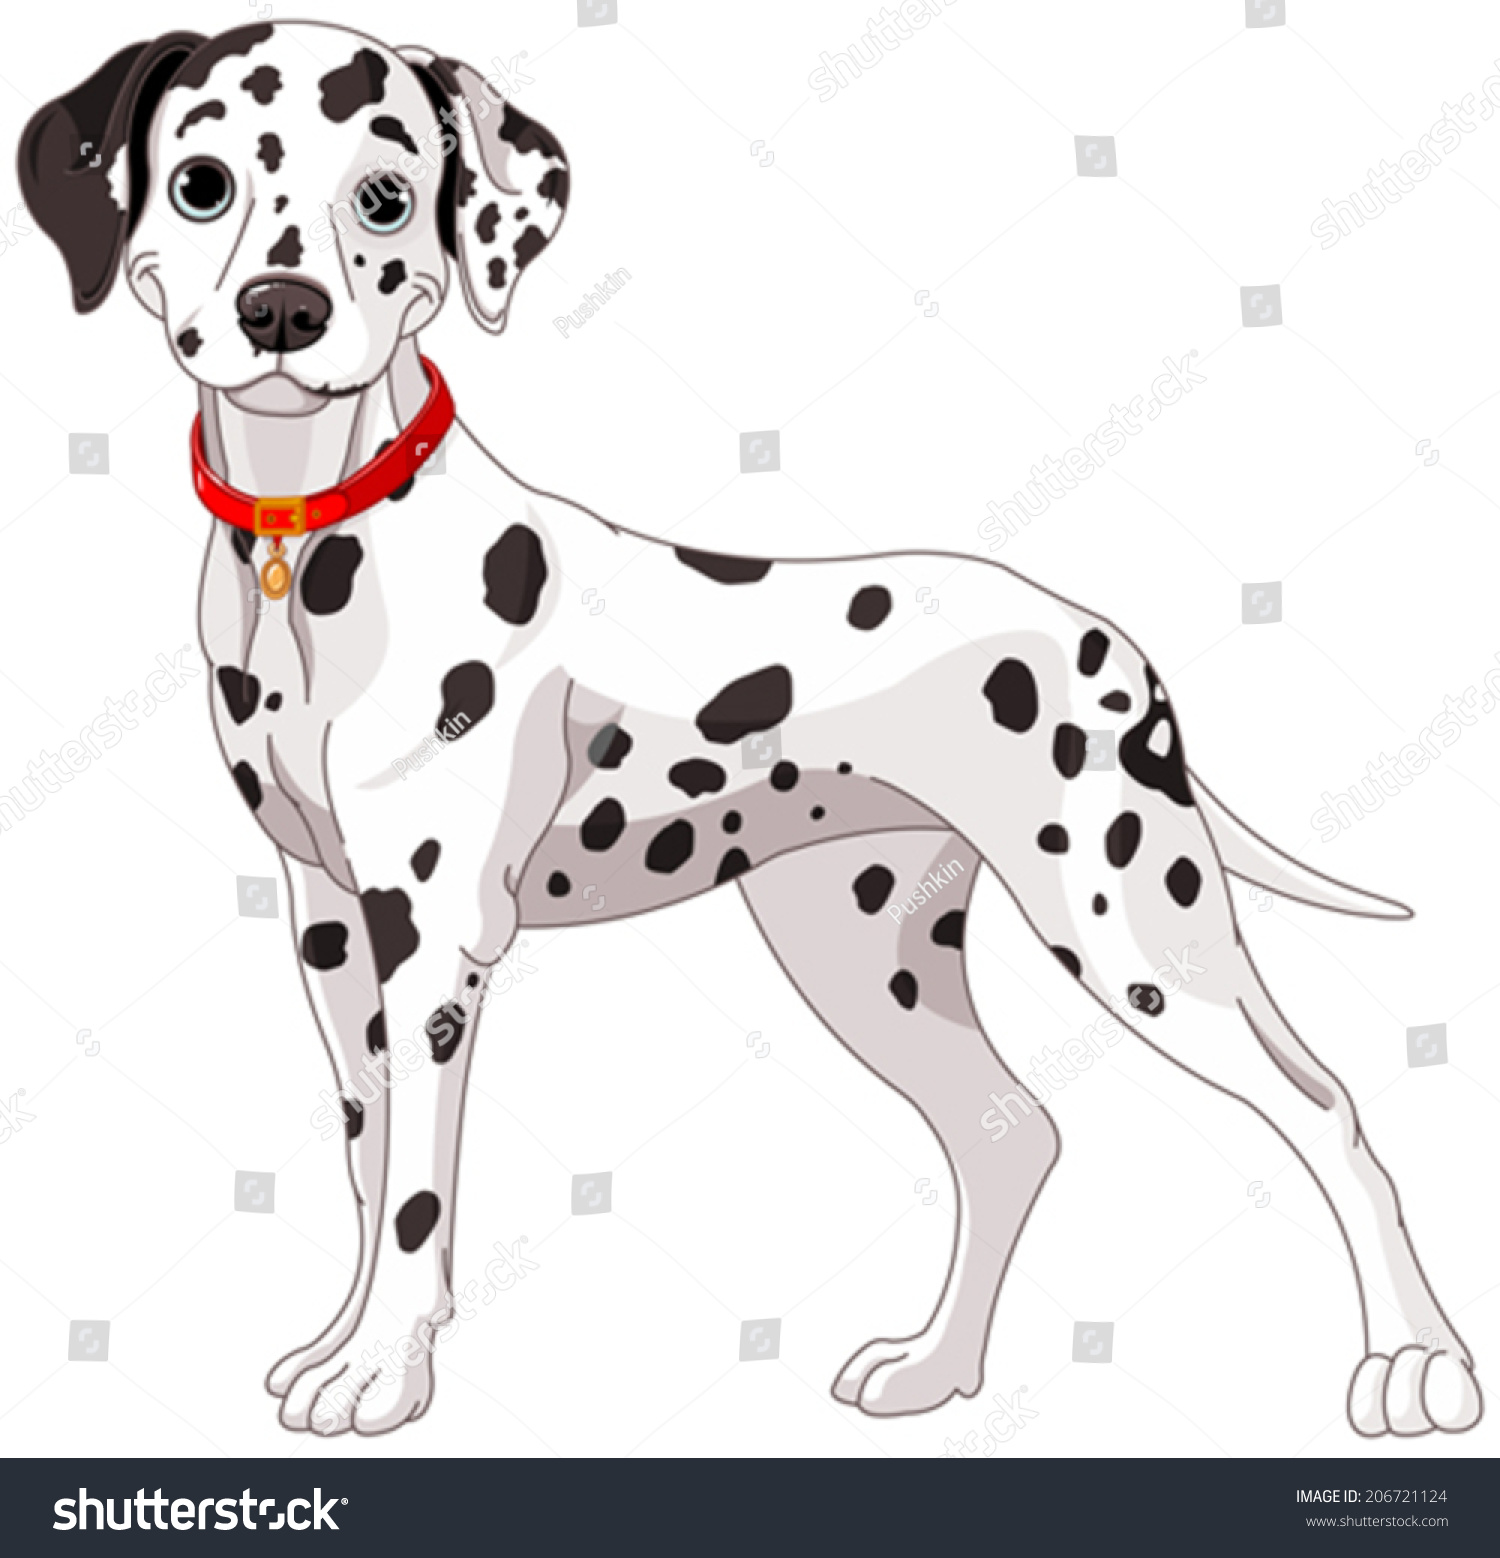 SVG of Illustration of a cute Dalmatian dog all attention svg